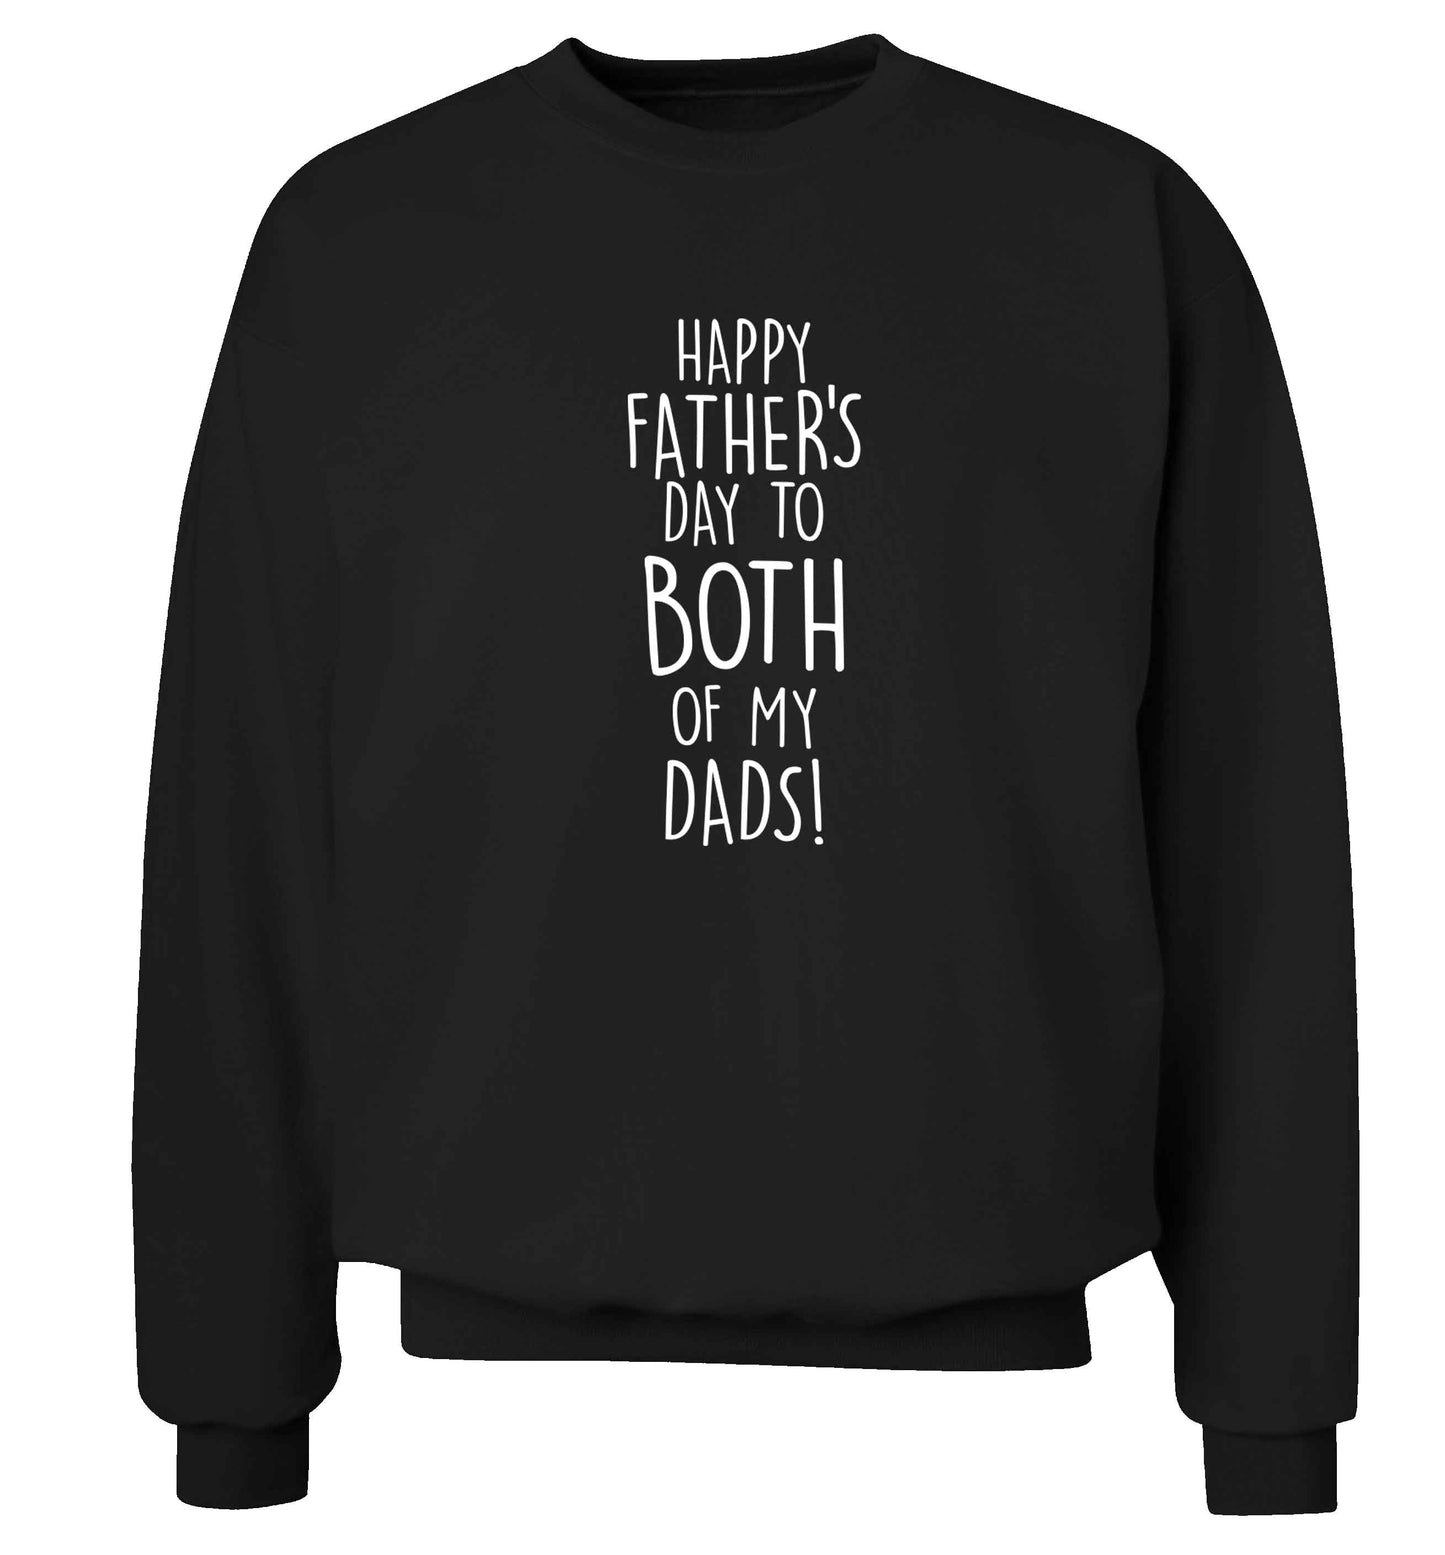 Happy Father's day to both of my dads adult's unisex black sweater 2XL